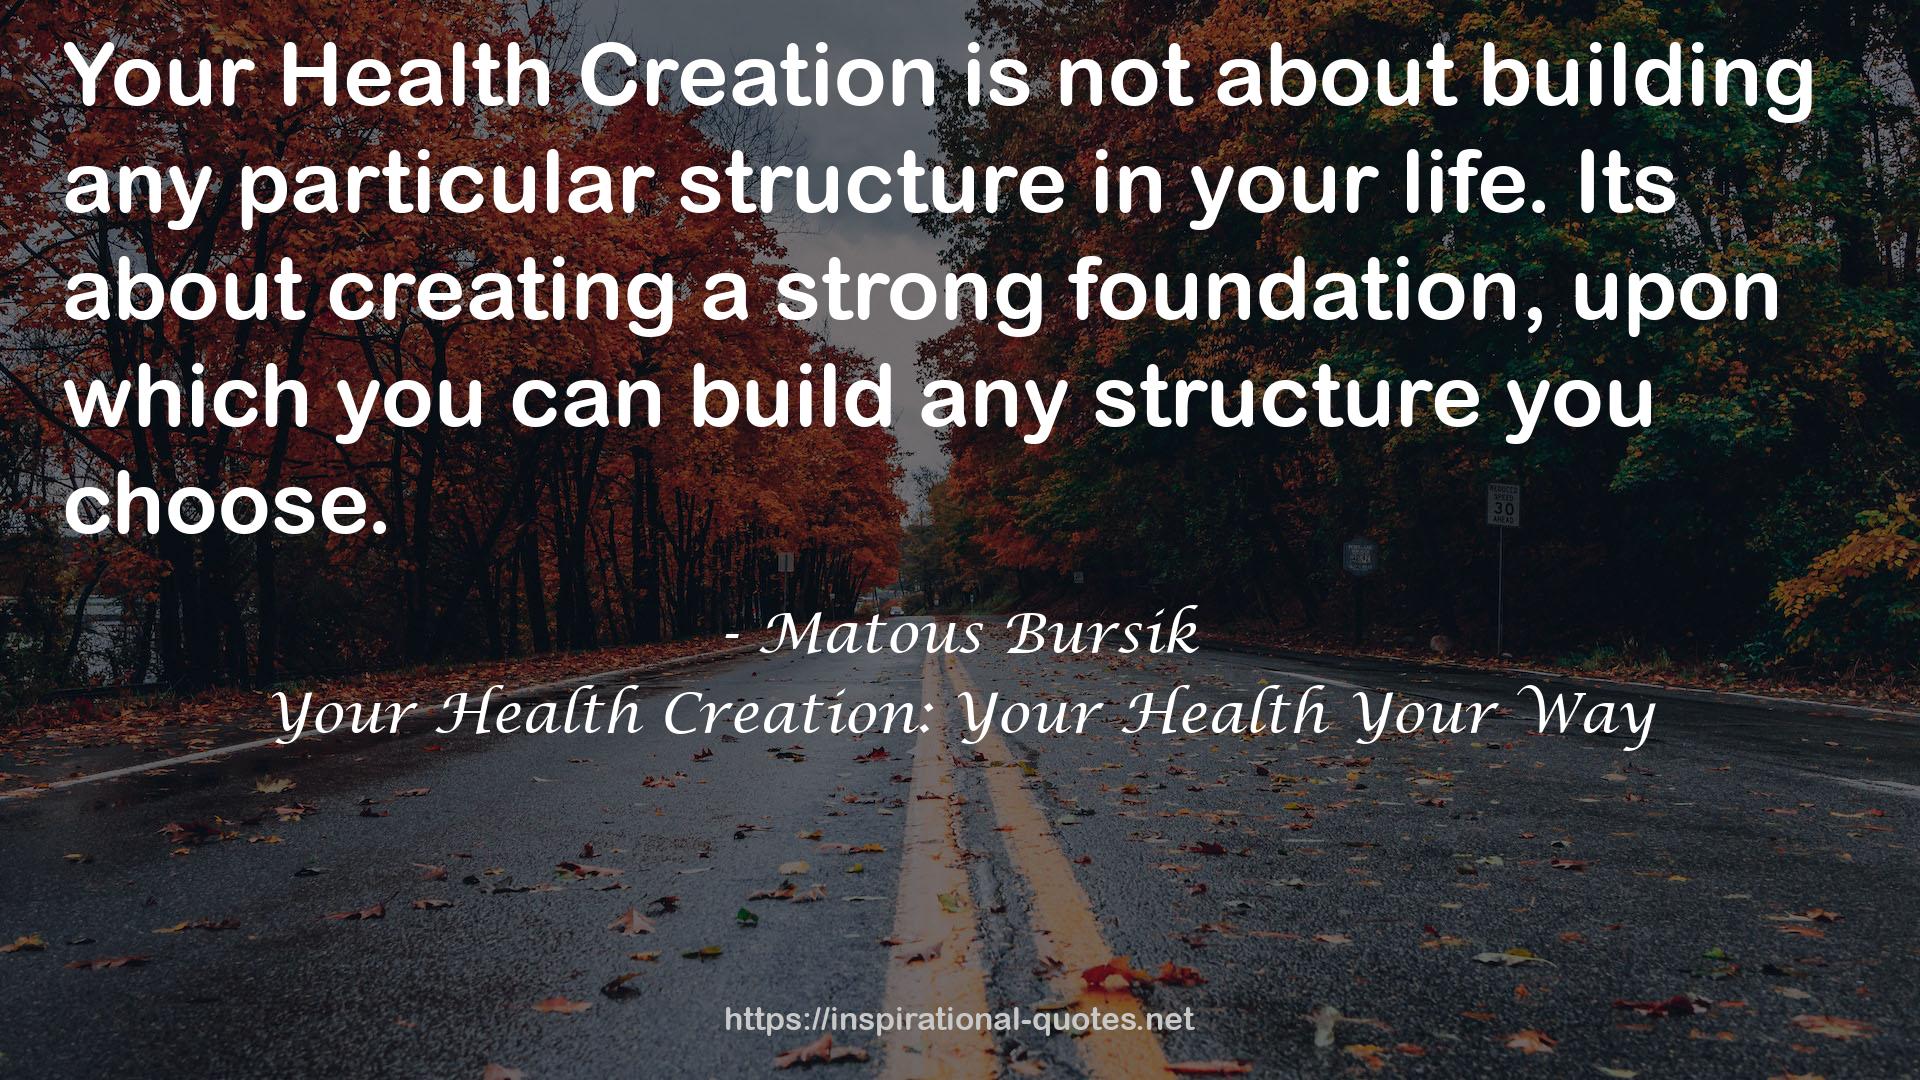 Your Health Creation: Your Health Your Way QUOTES